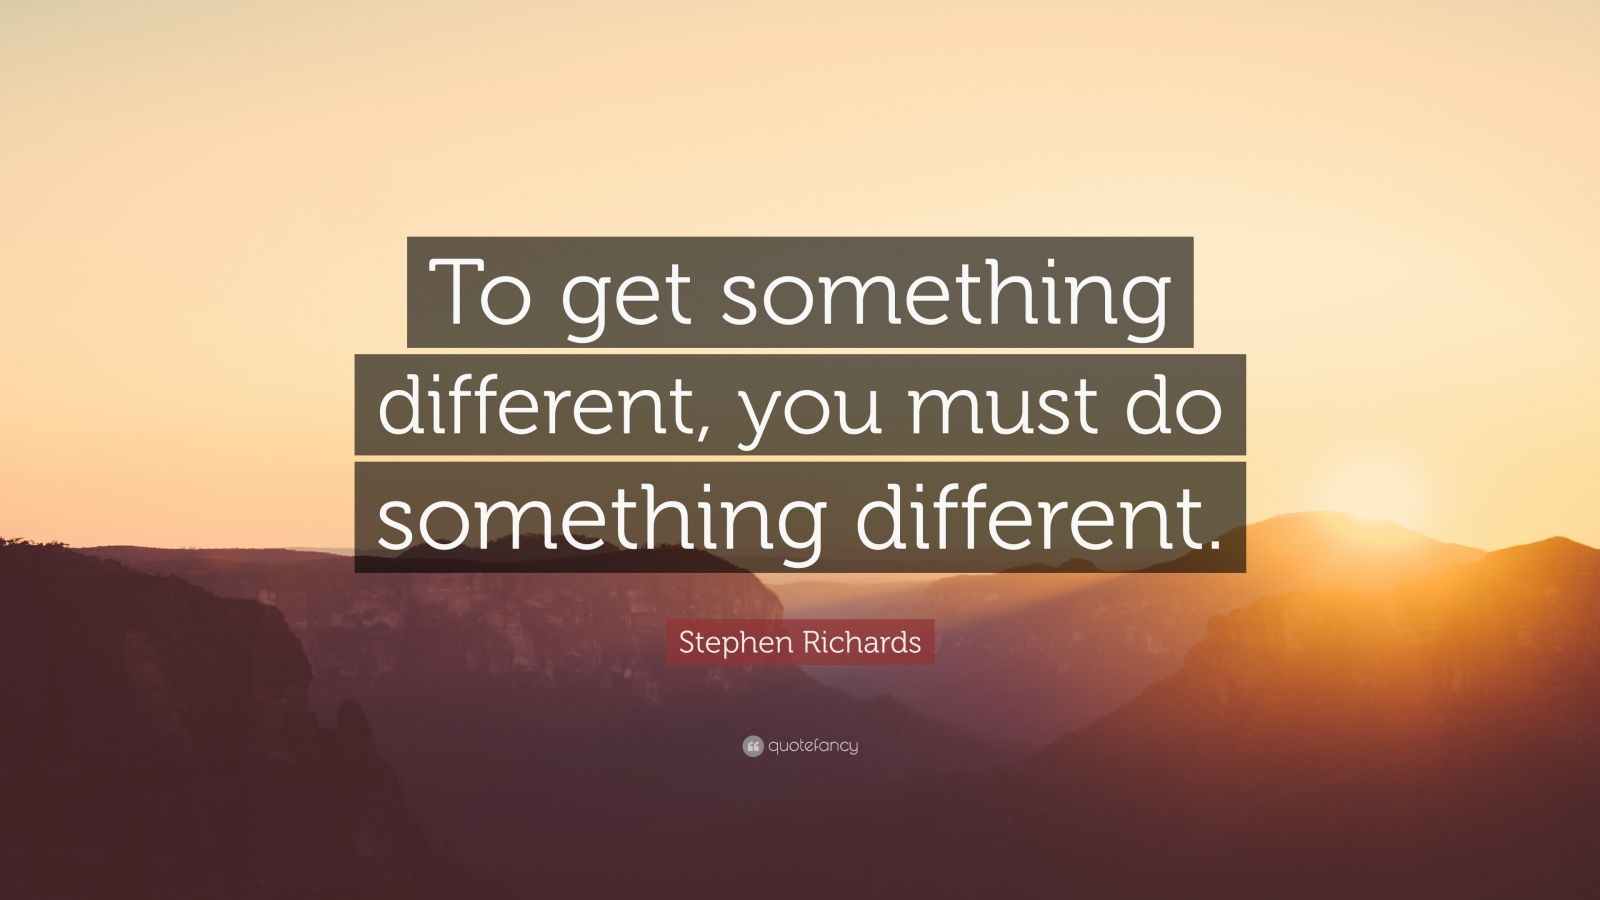 Stephen Richards Quote: “To get something different, you must do